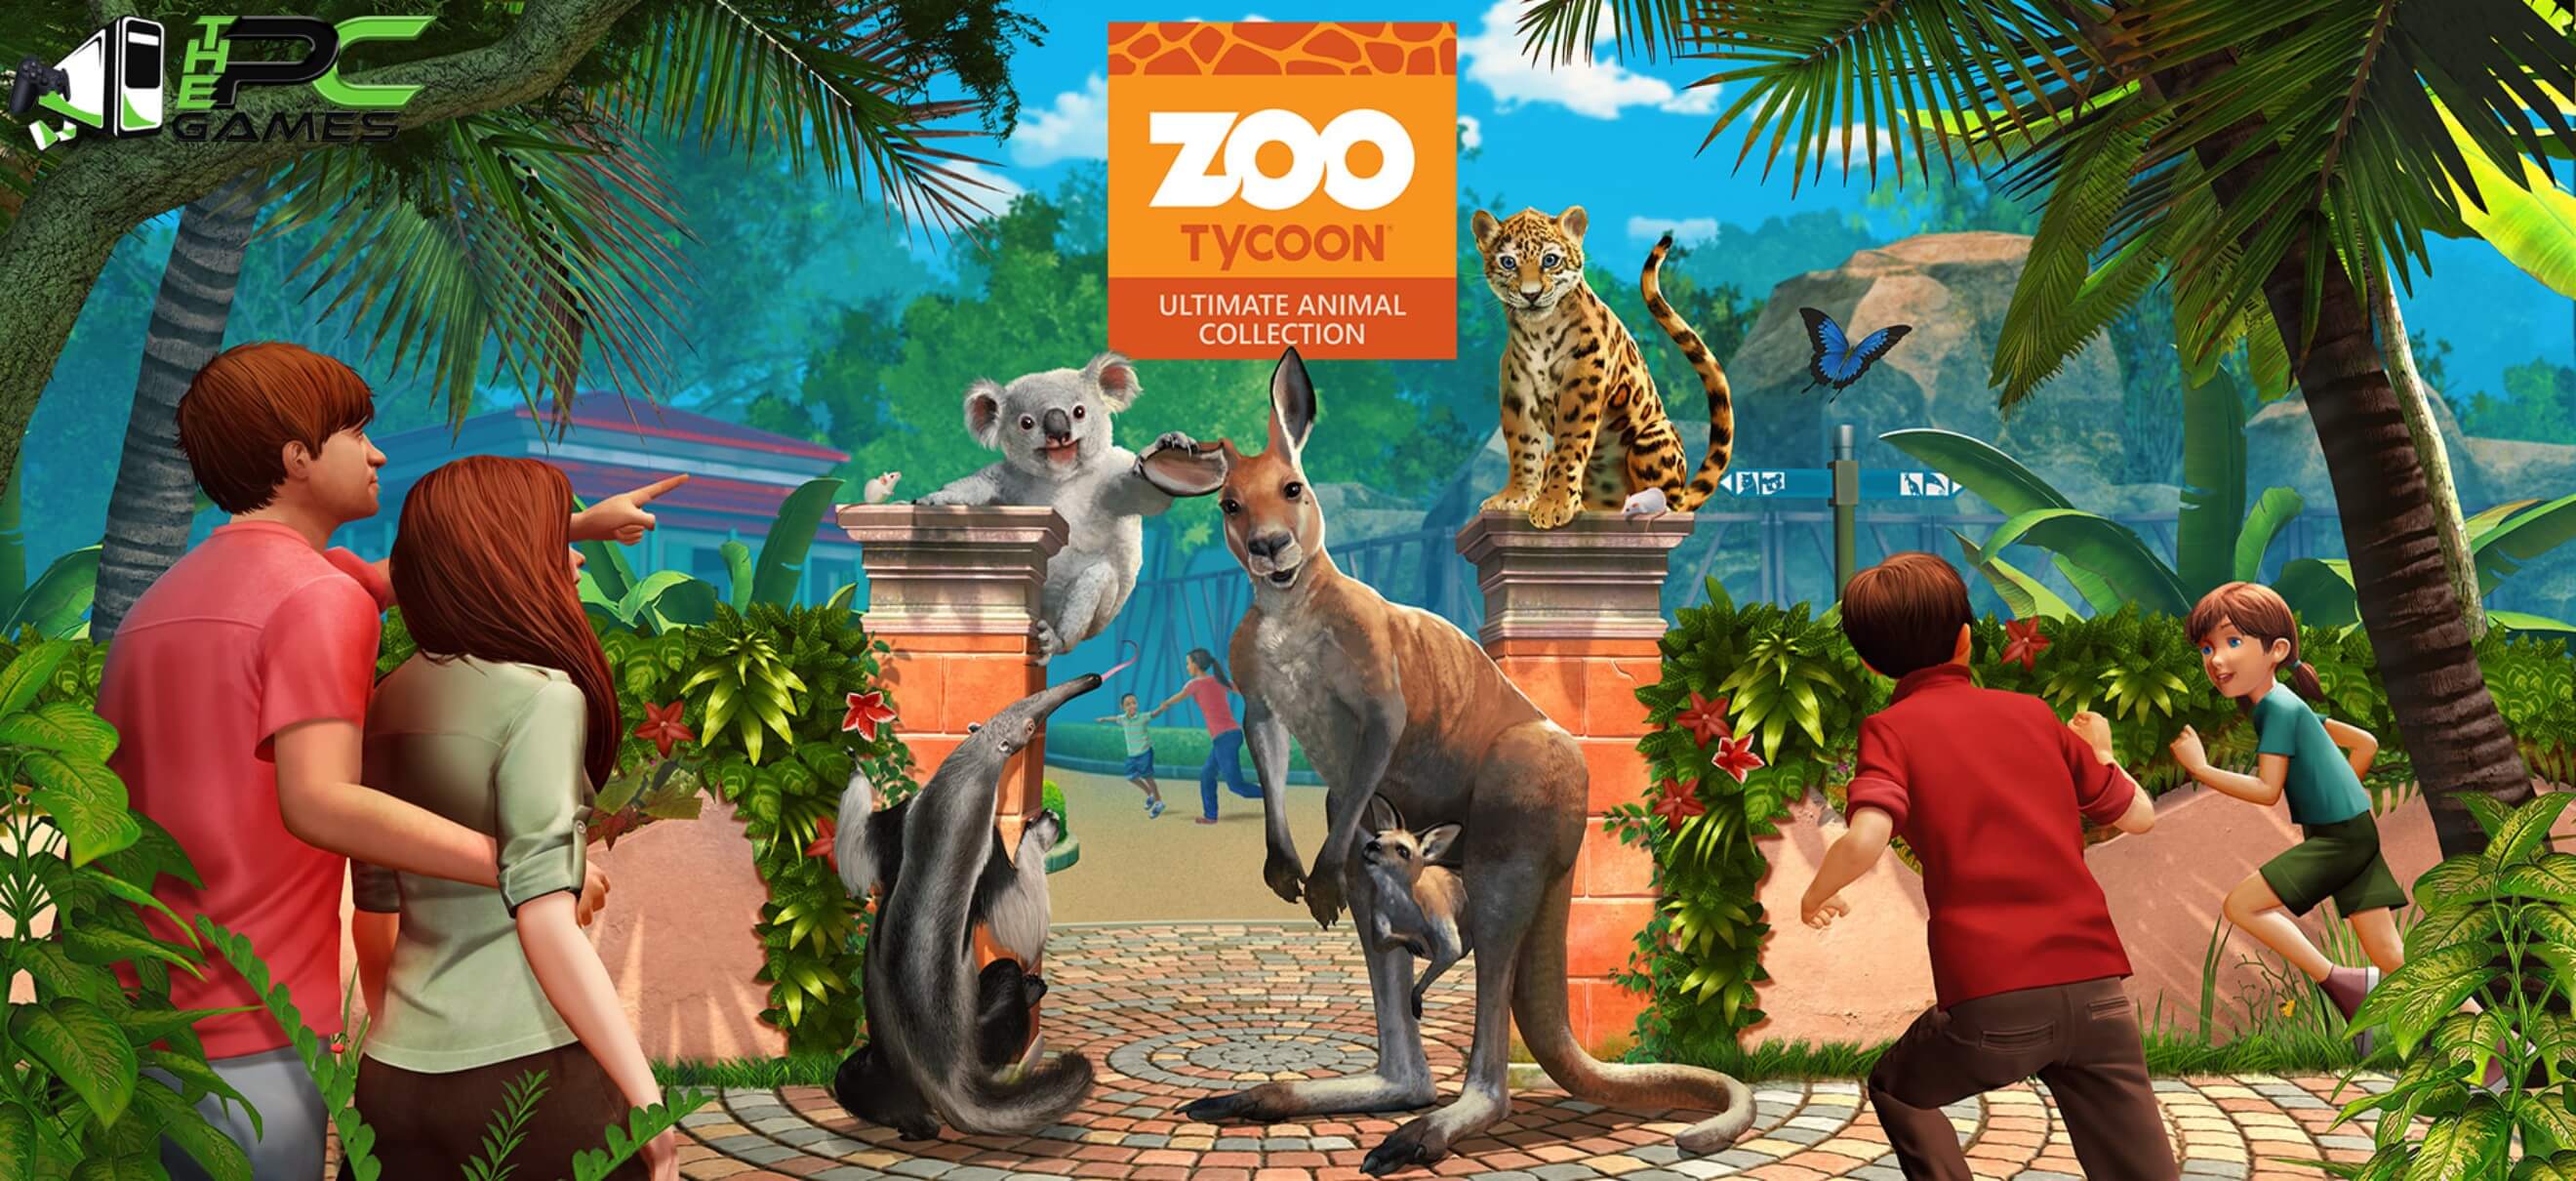 Zoo tycoon official site